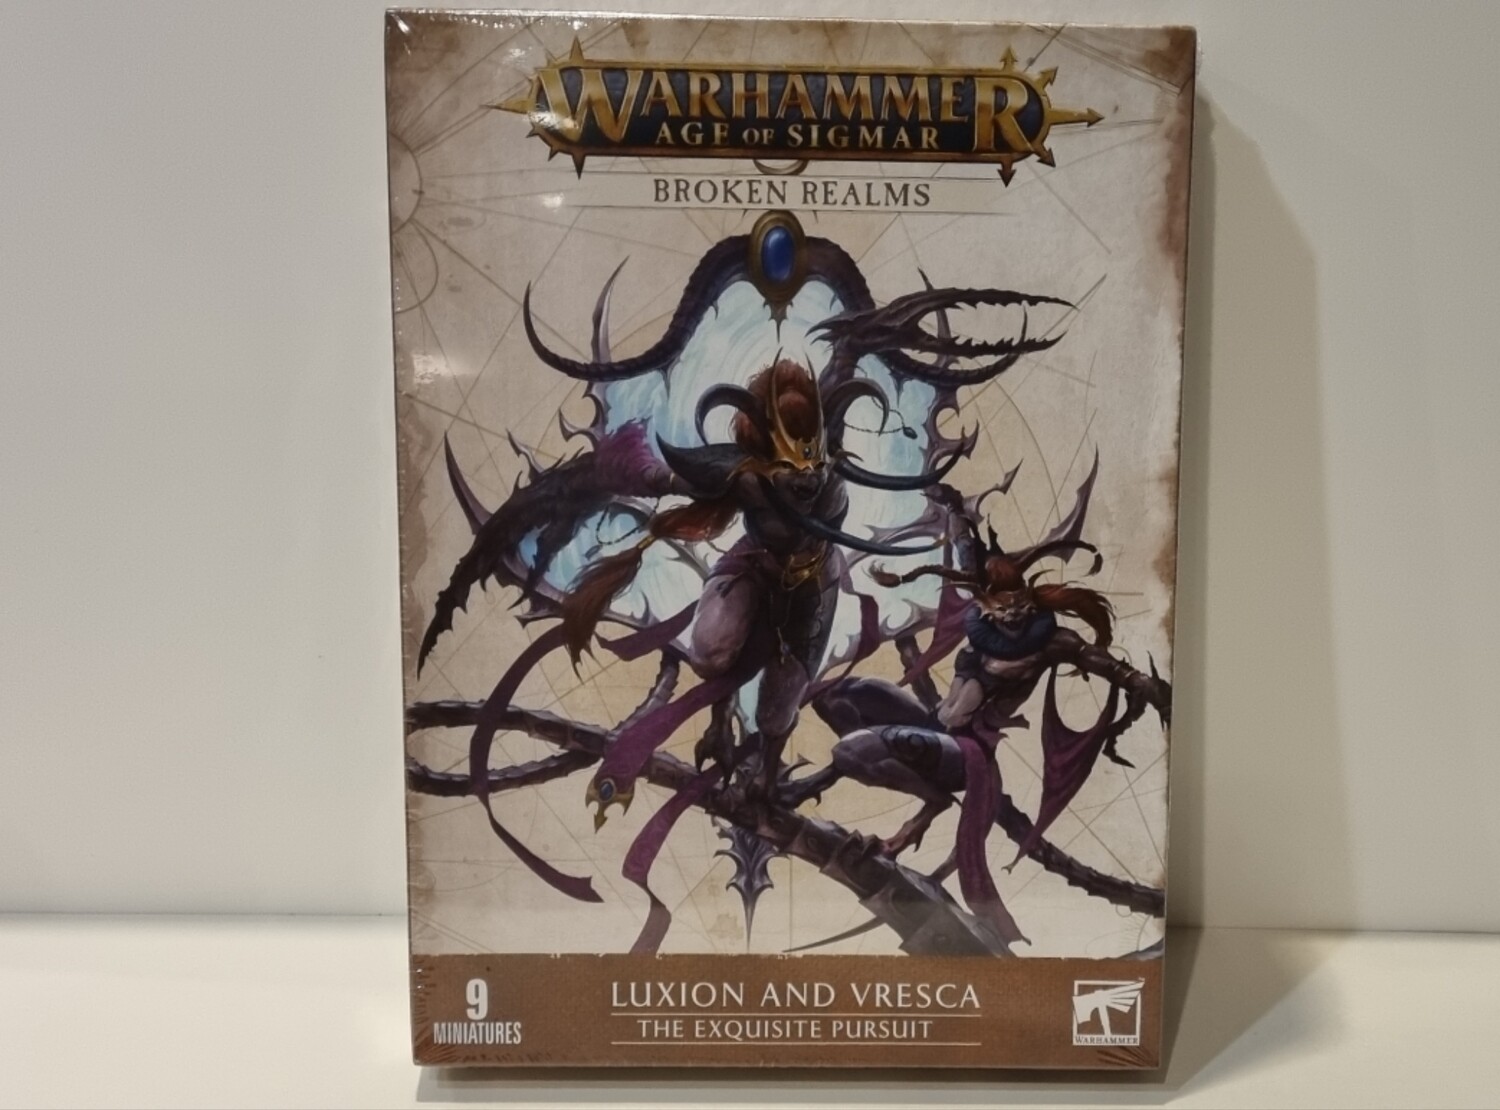 Warhammer, Age of Sigmar, 83-97, Broken Realms: Luxion and Vresca, The Exquisite Pursuit